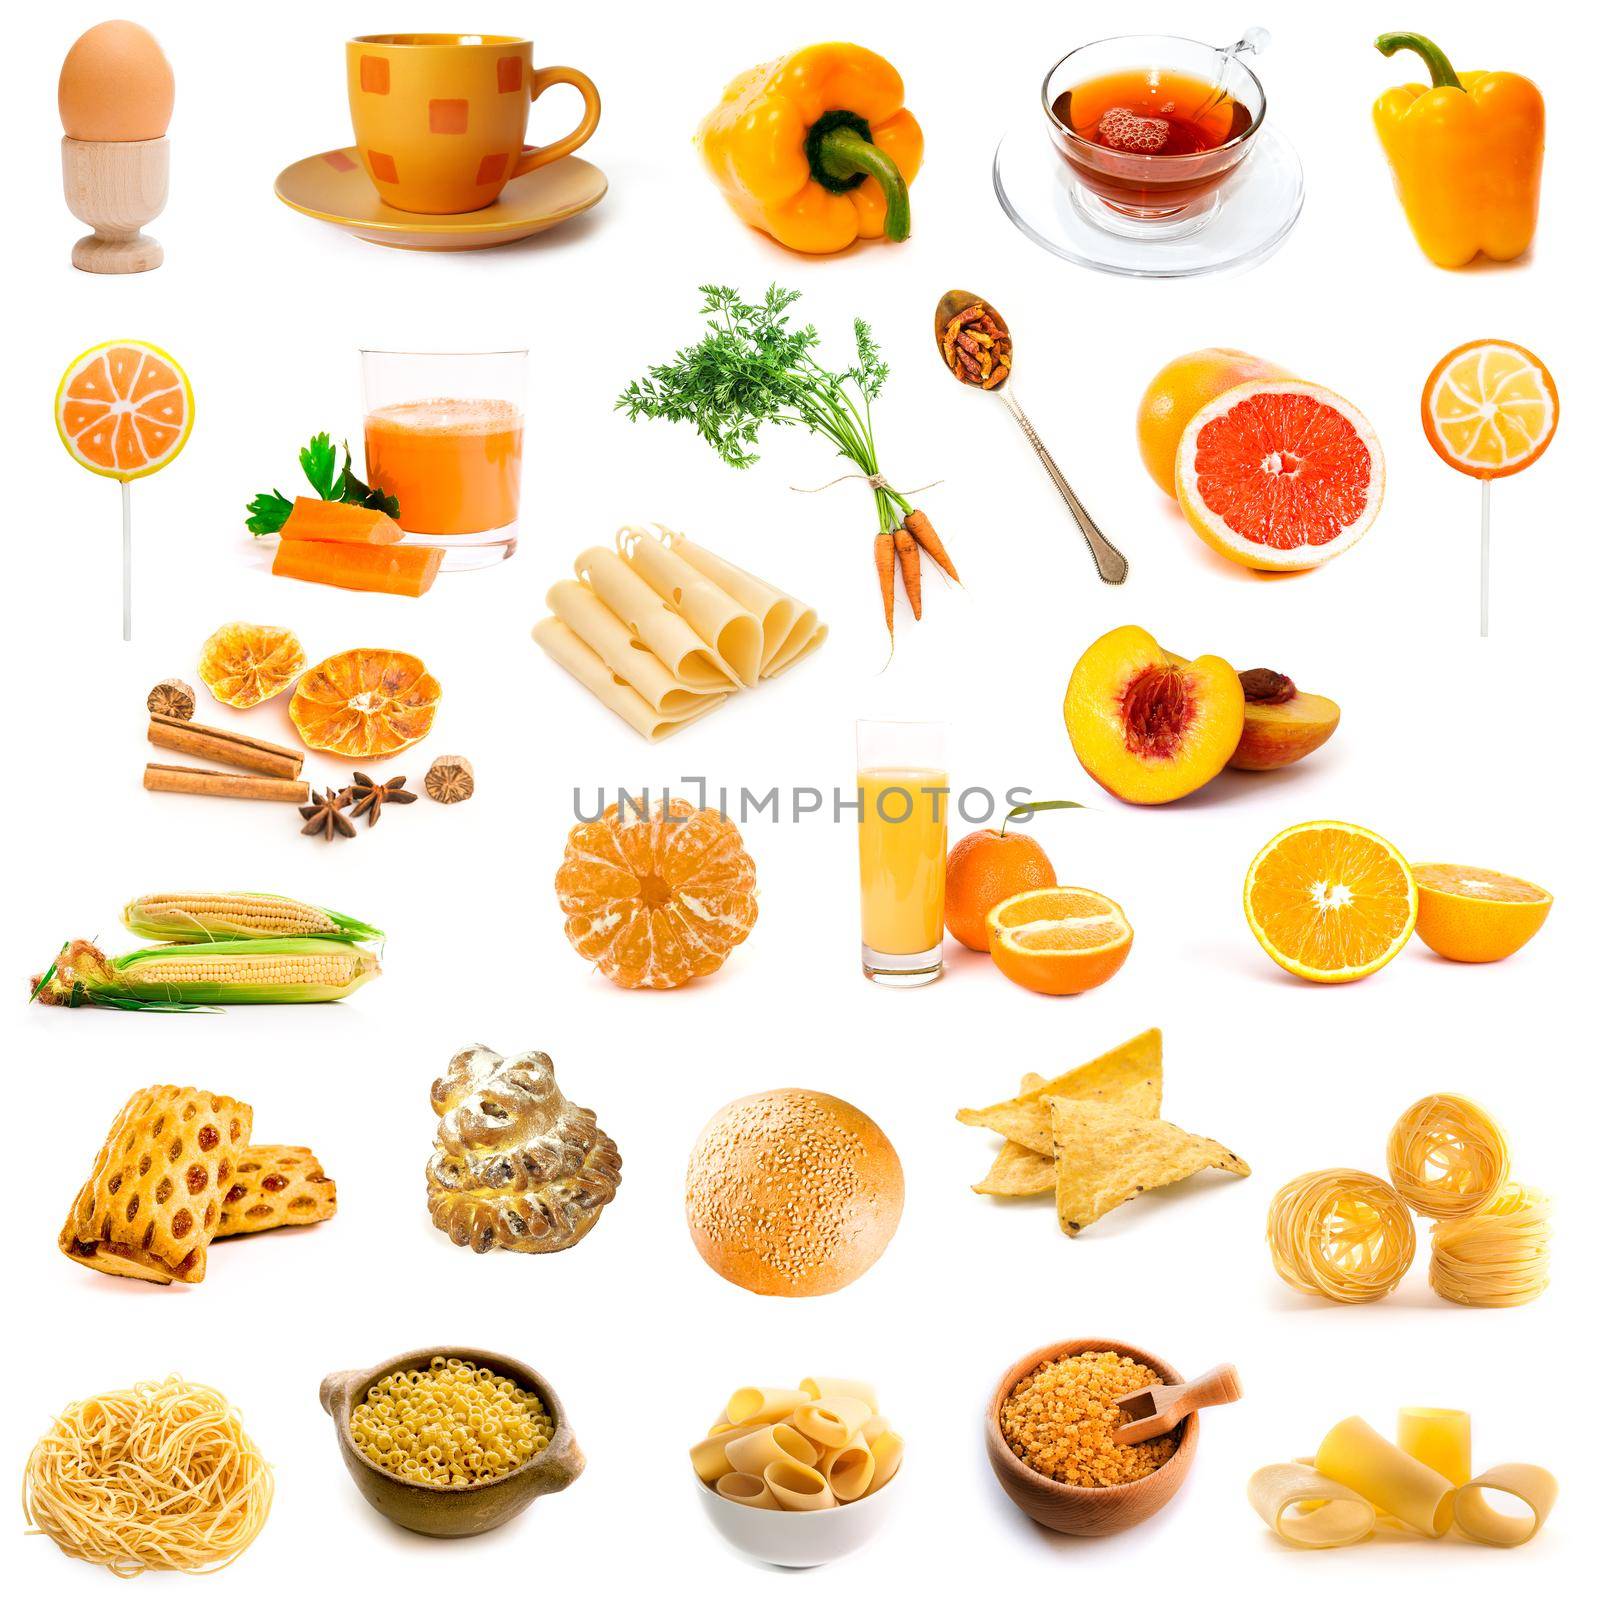 orange and yellow color products collage by tan4ikk1